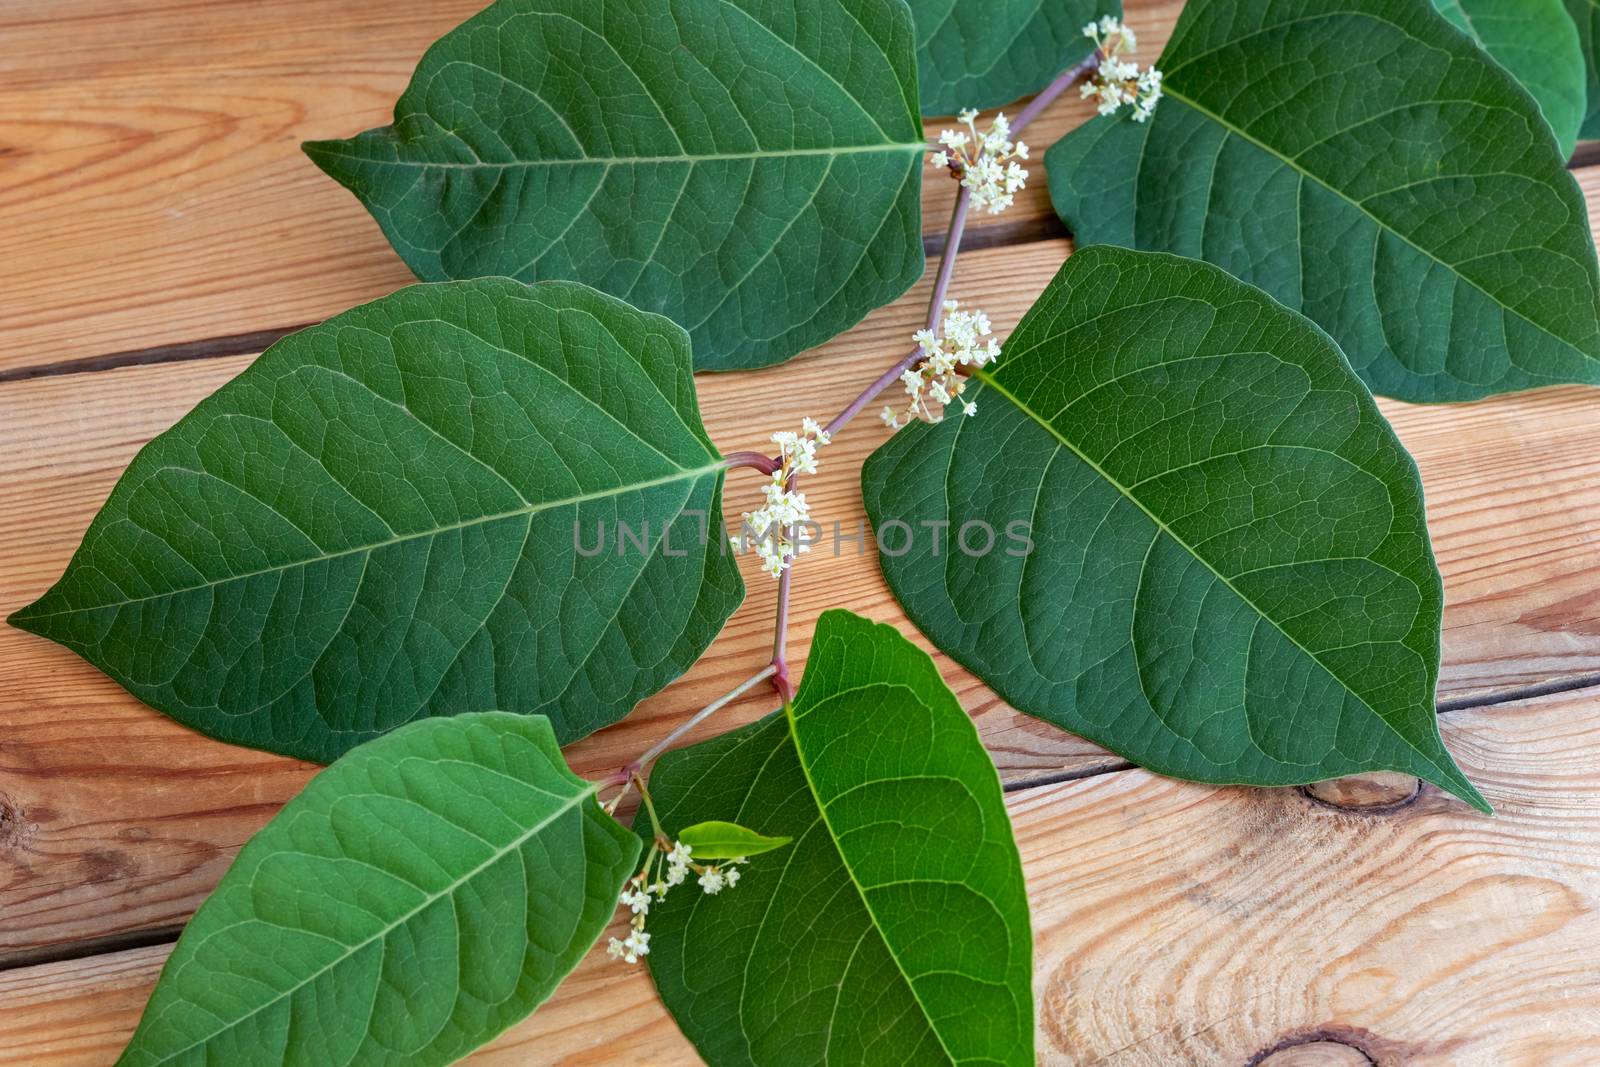 Blooming Japanese knotweed branch on a table